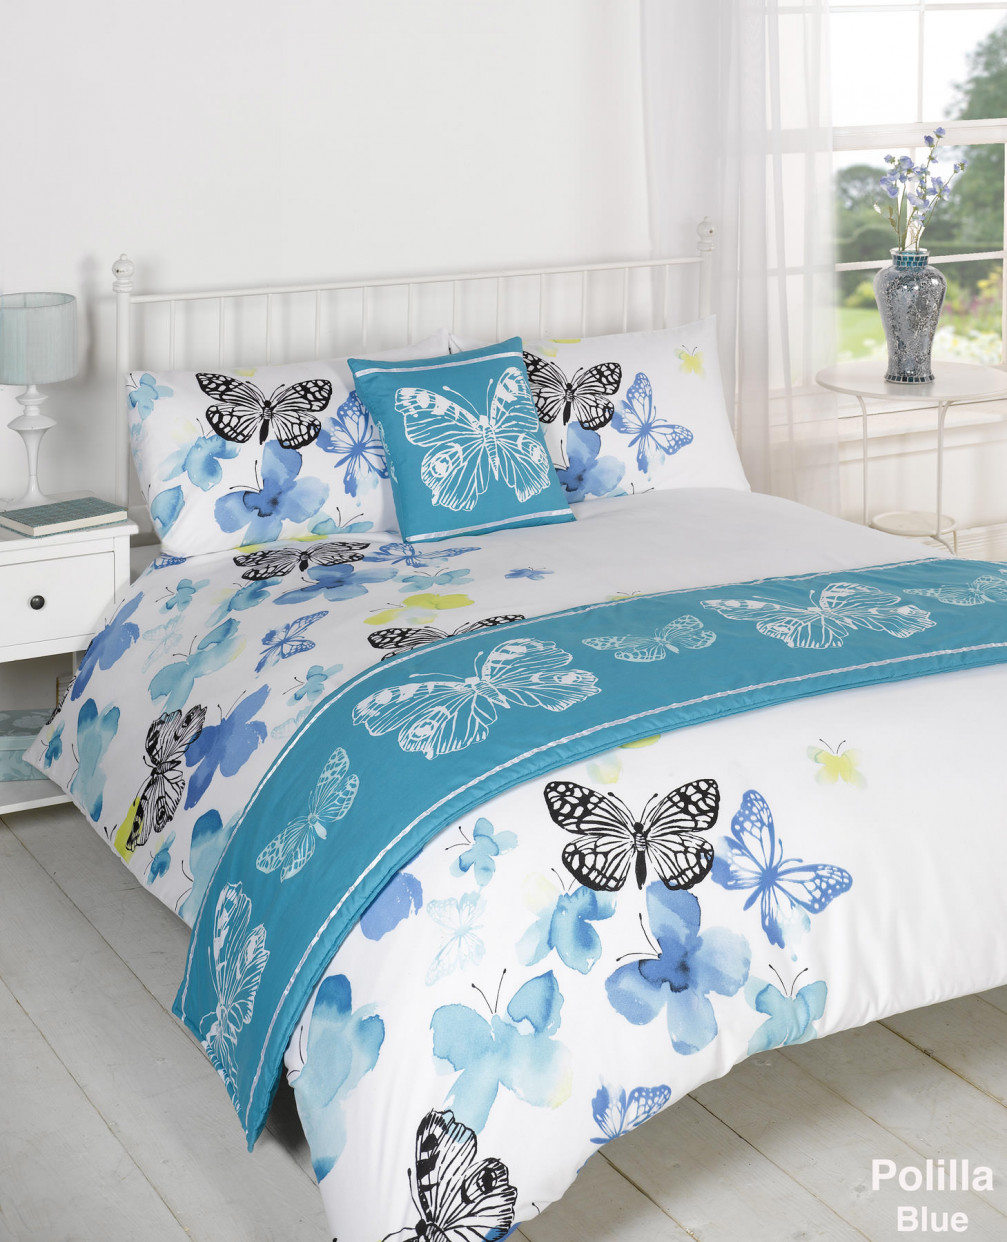 Polilla Bed In A Bag Double Duvet Cover Set - Blue>